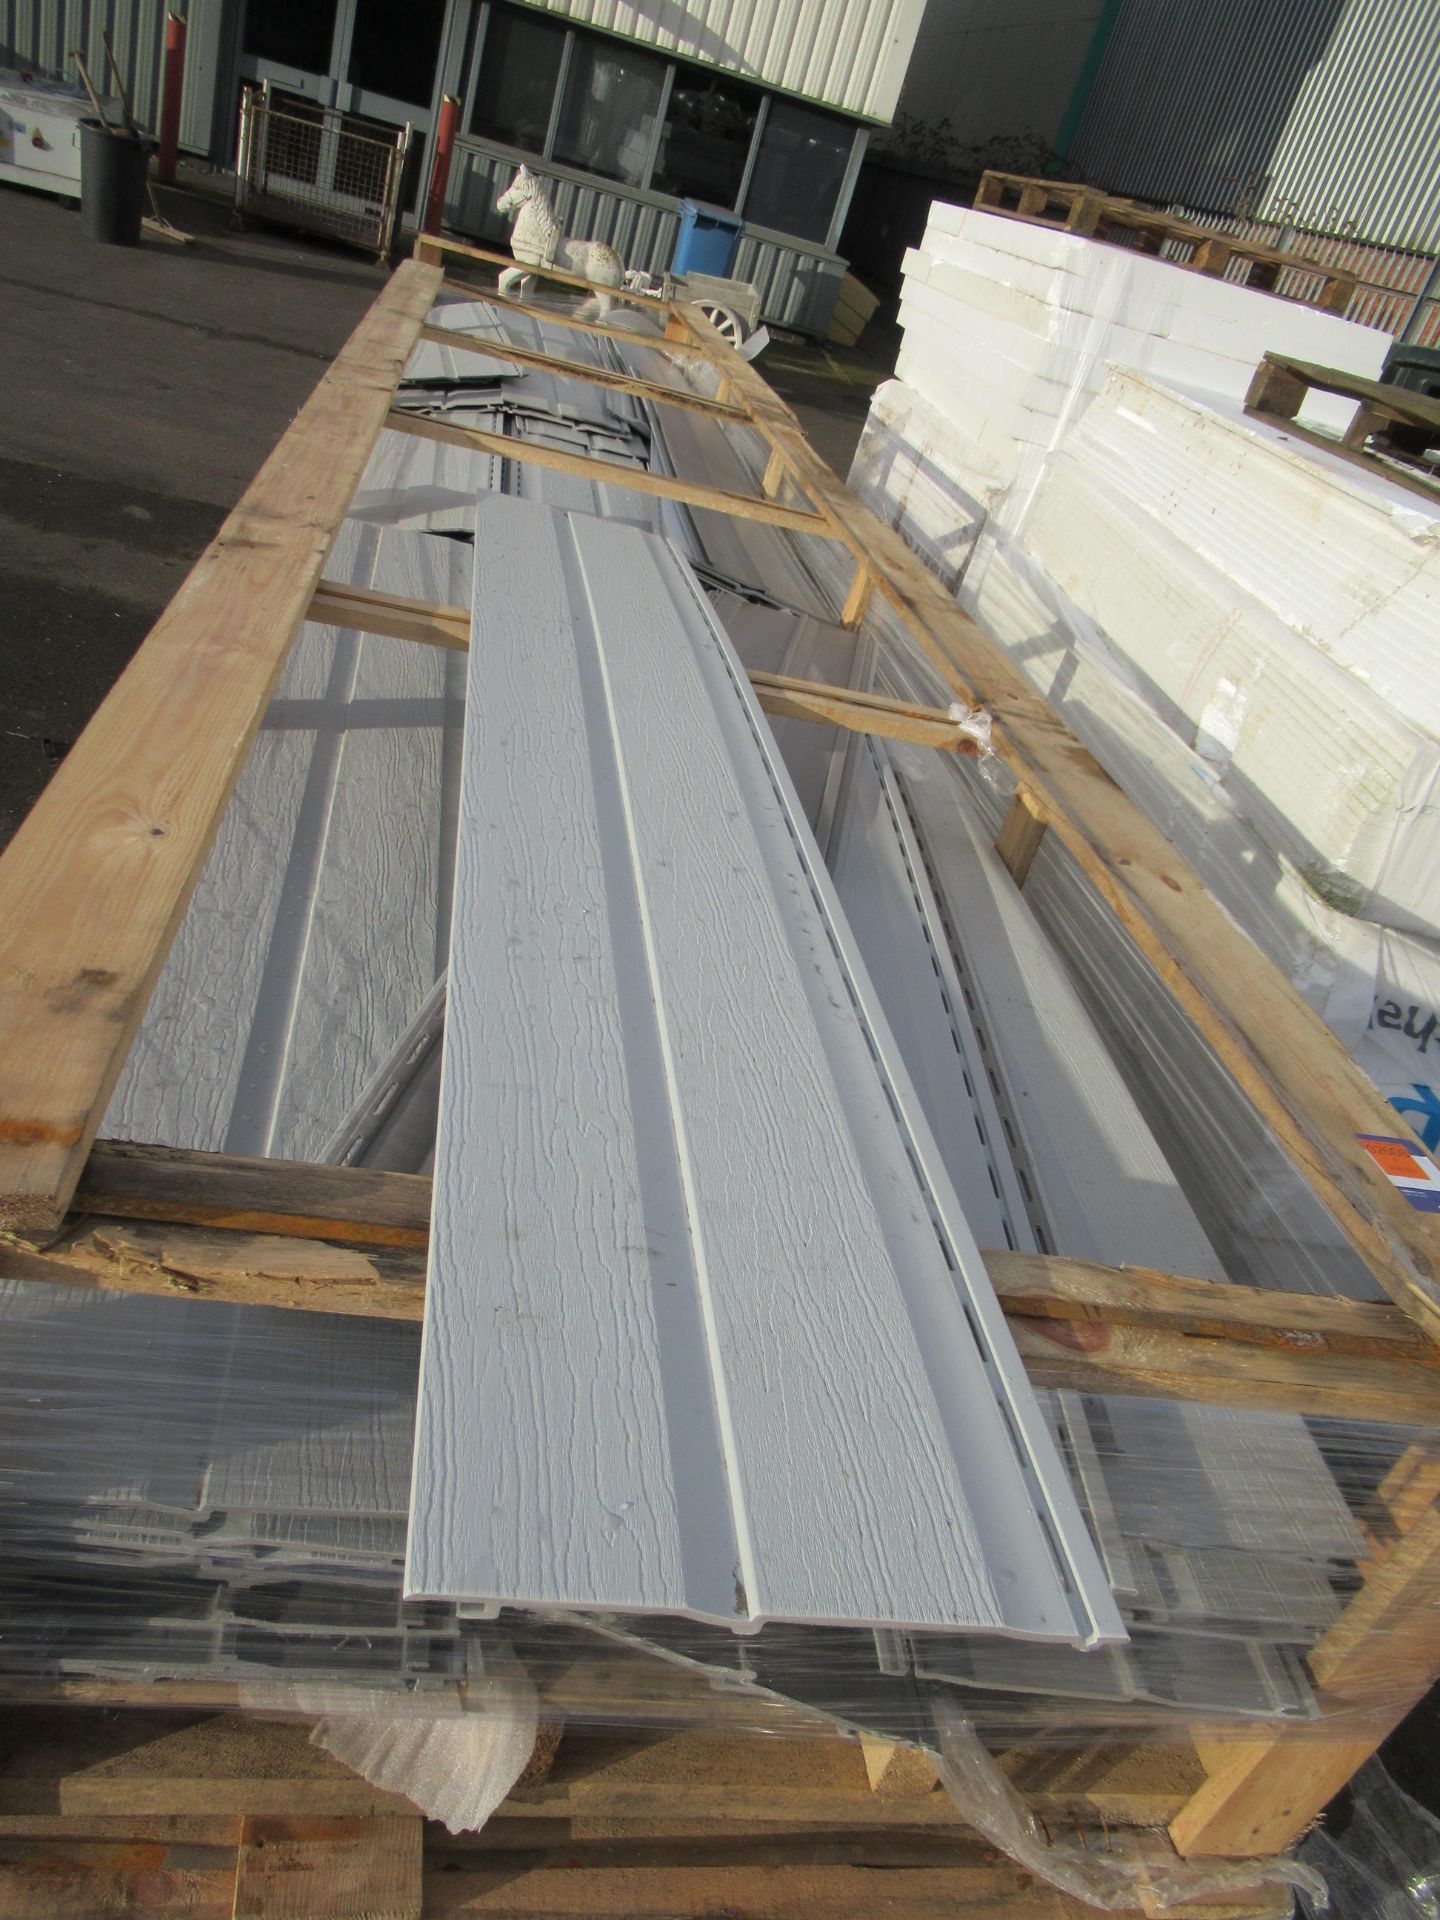 Crate containing caravan cladding in light grey - Image 3 of 4